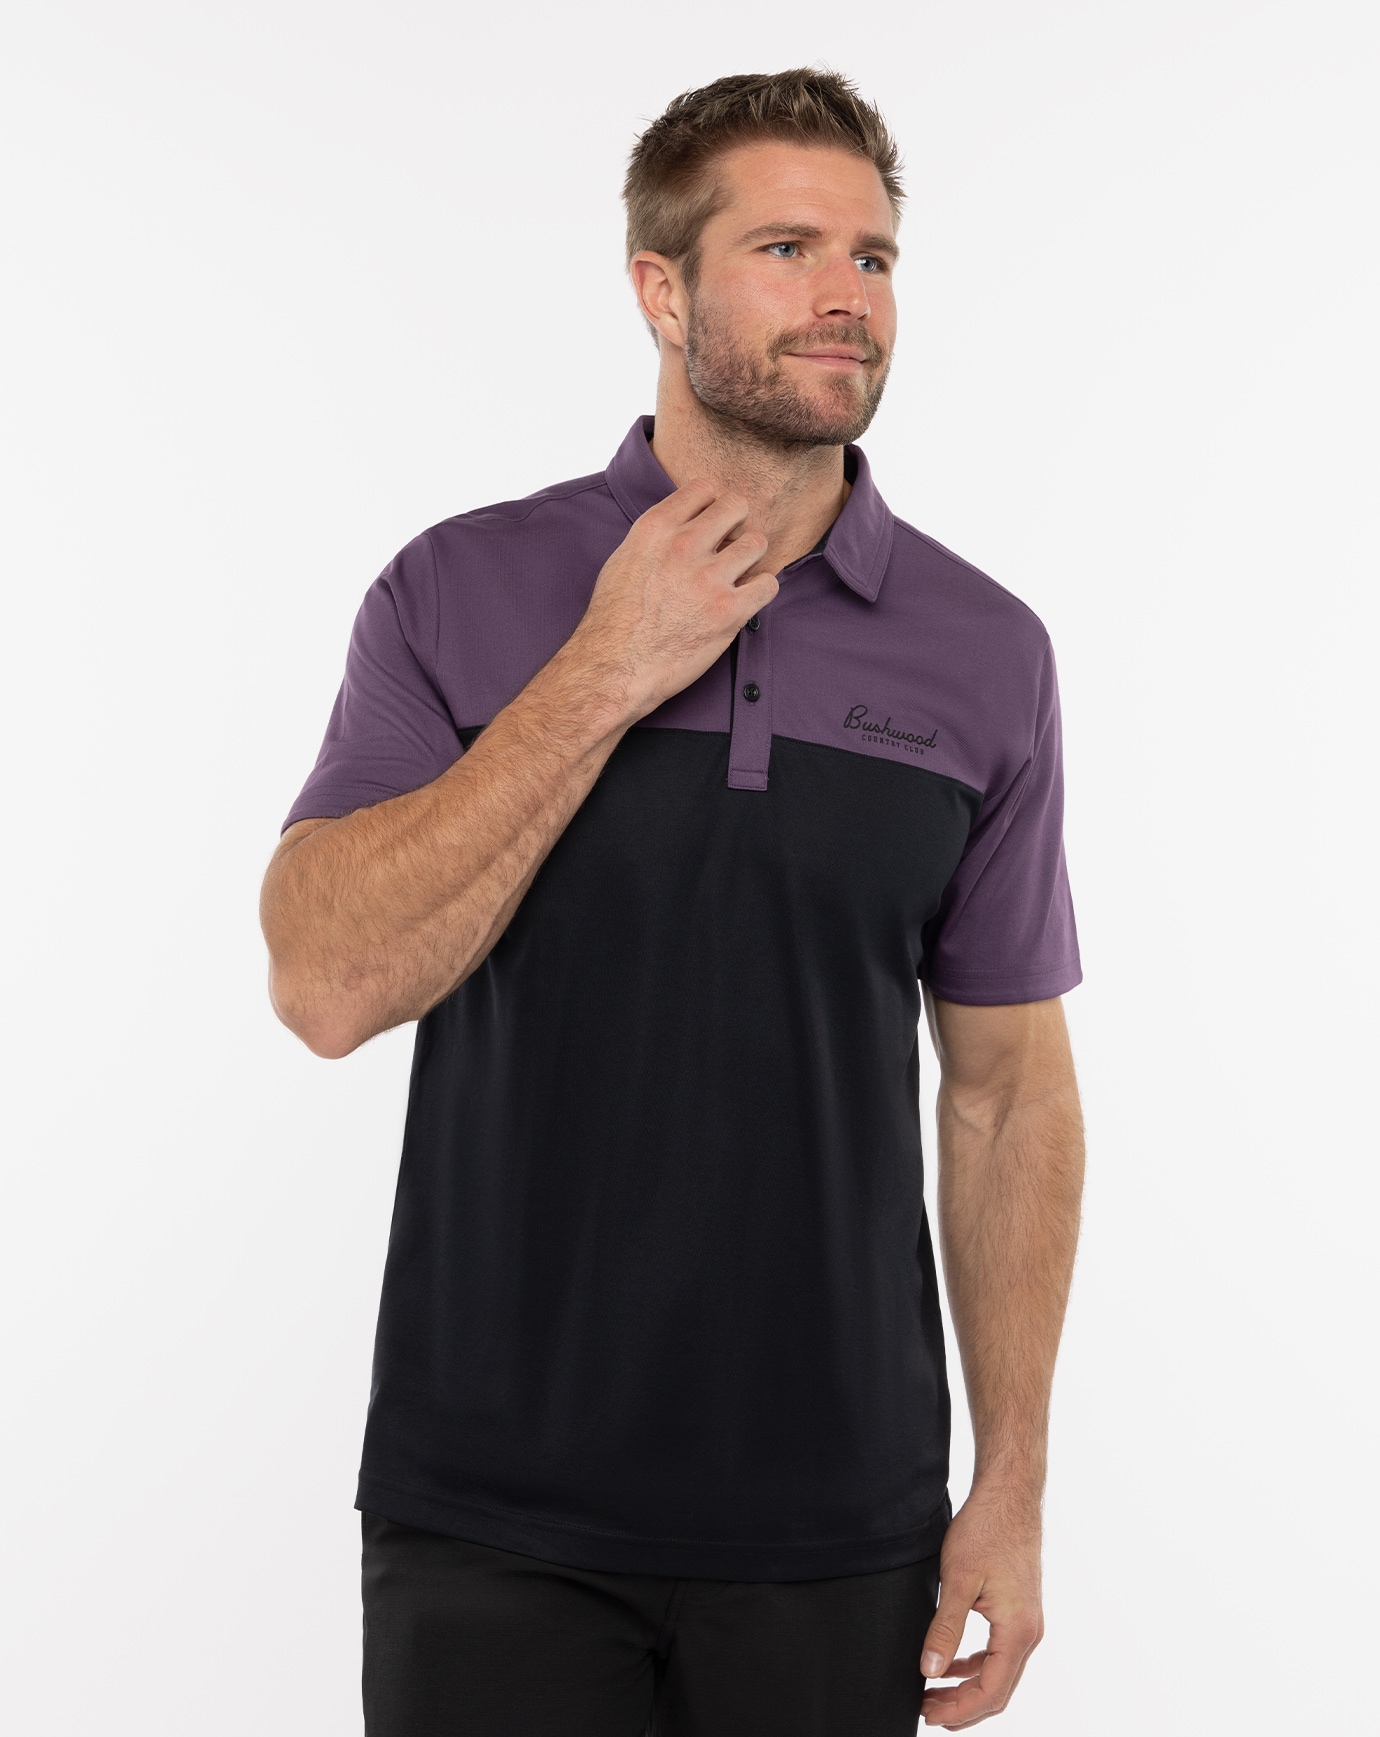 Related Product - HAVE A GLASS POLO